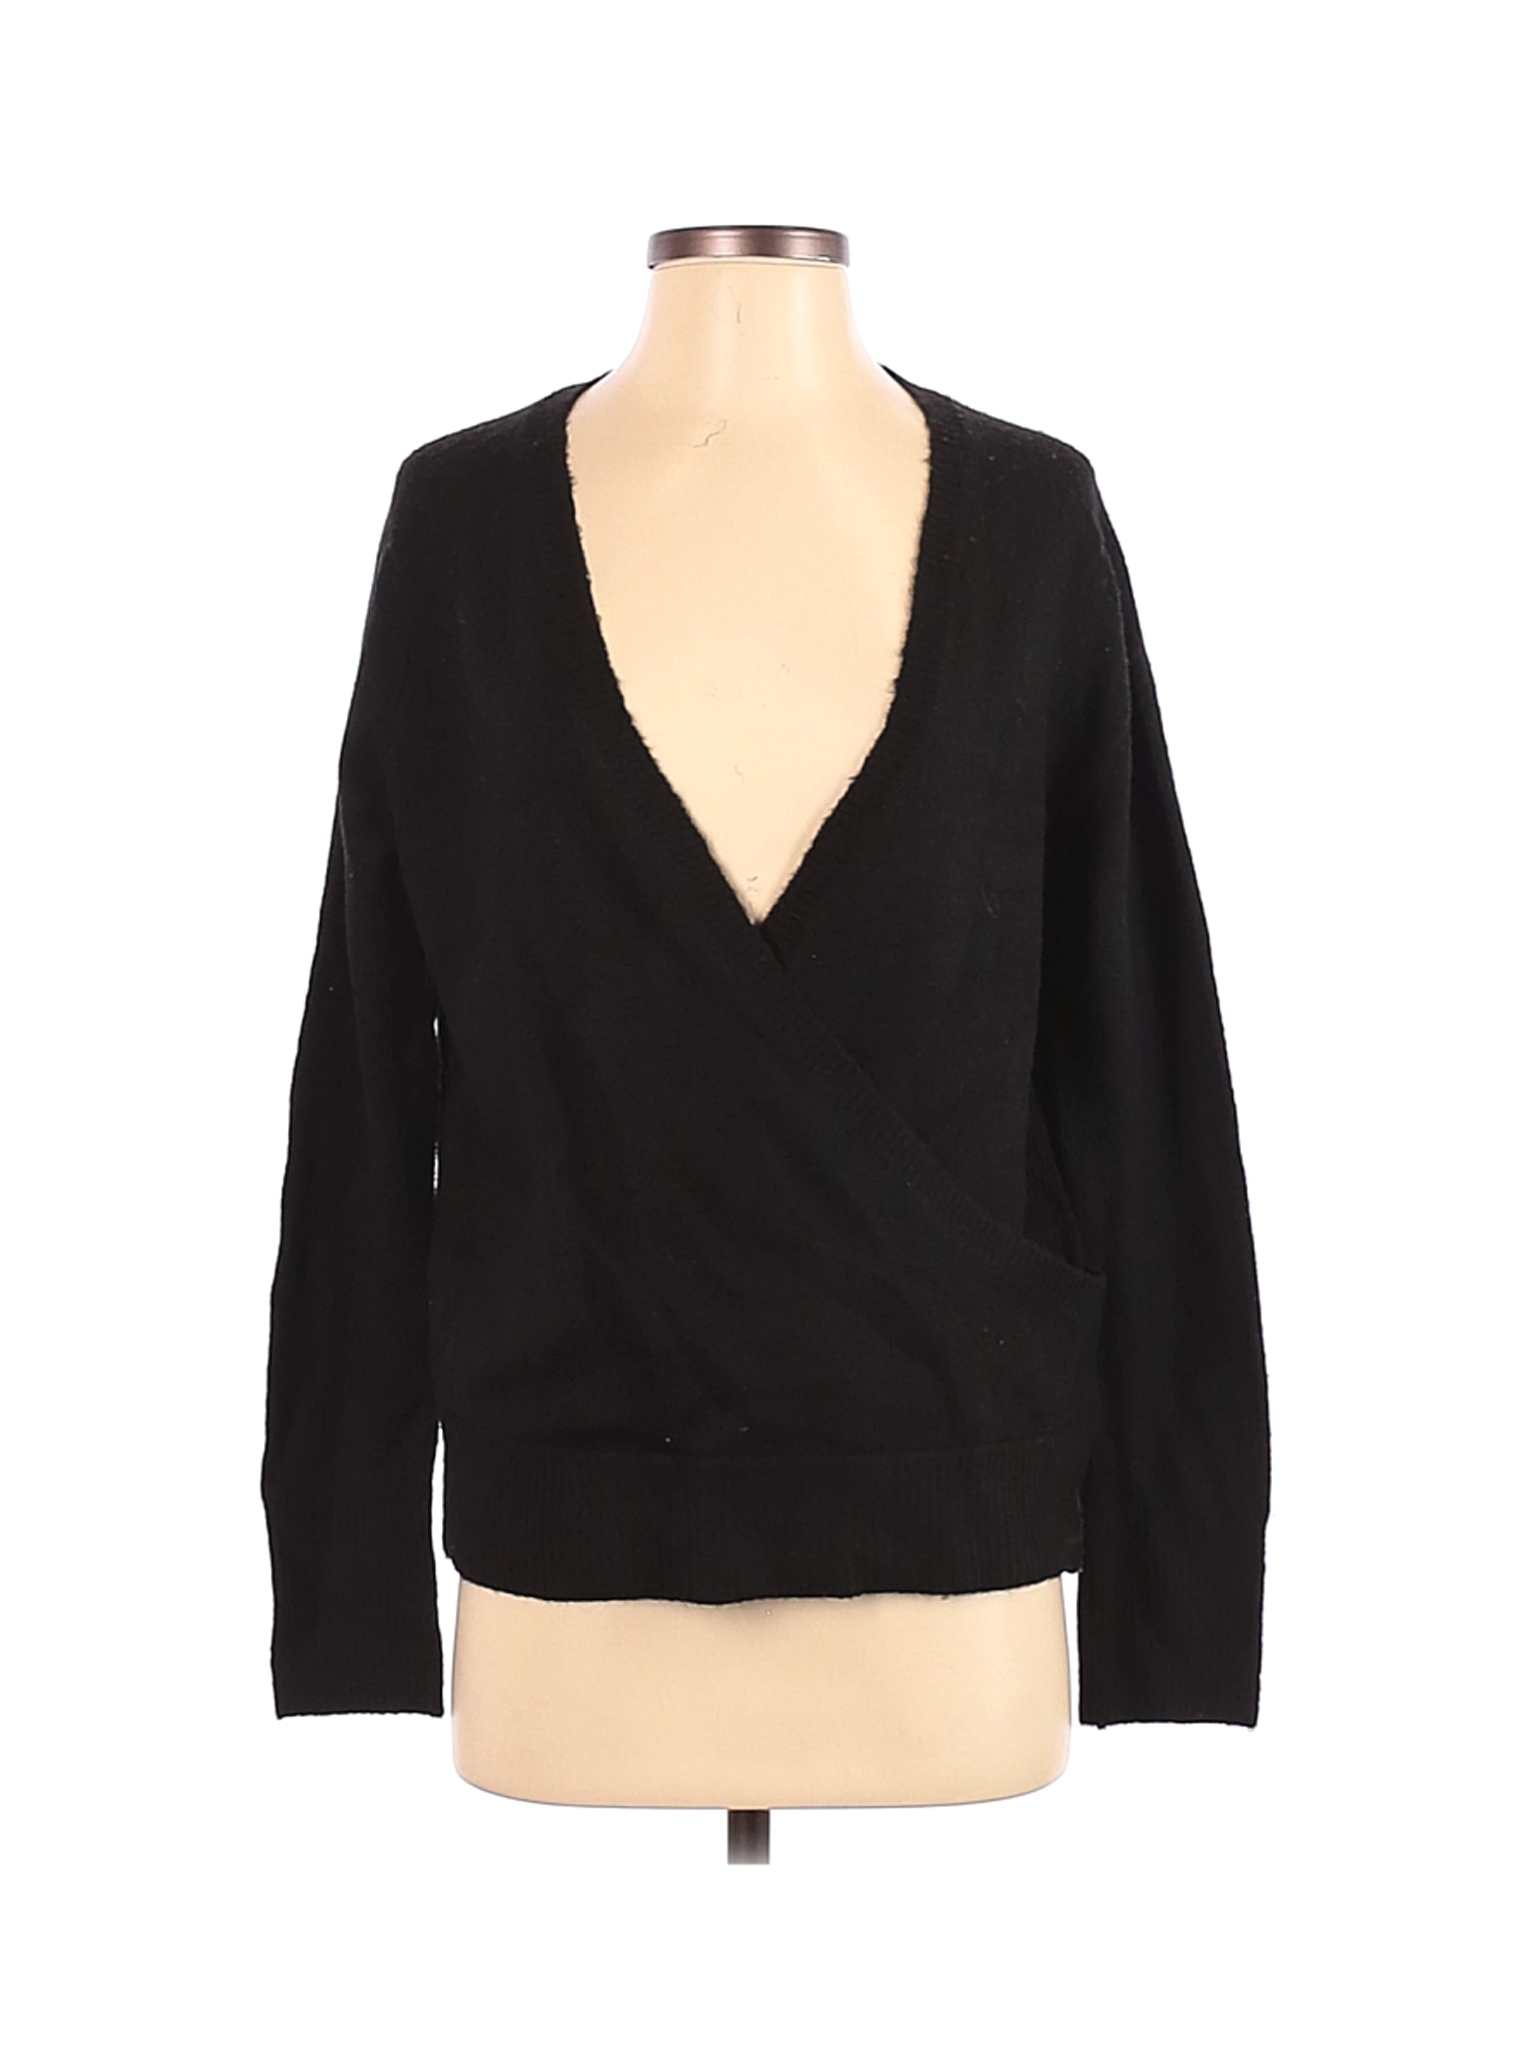 NWT Vince Camuto Women Black Pullover Sweater S | eBay